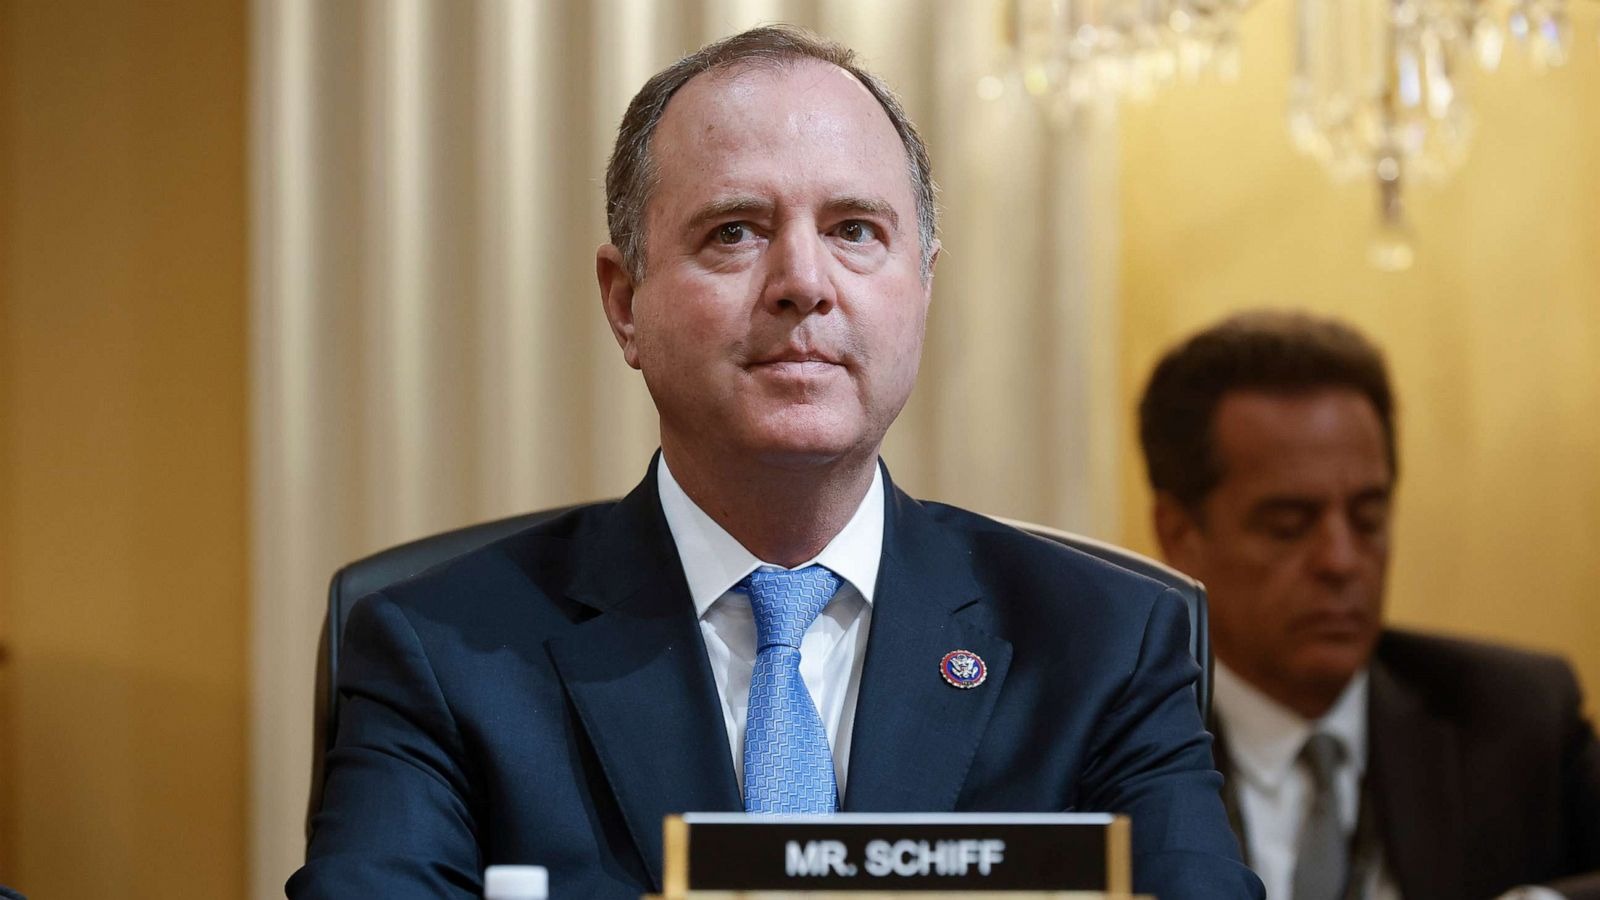 Adam Schiff's New Ad Draws Criticism from GOP and Democratic Opponents